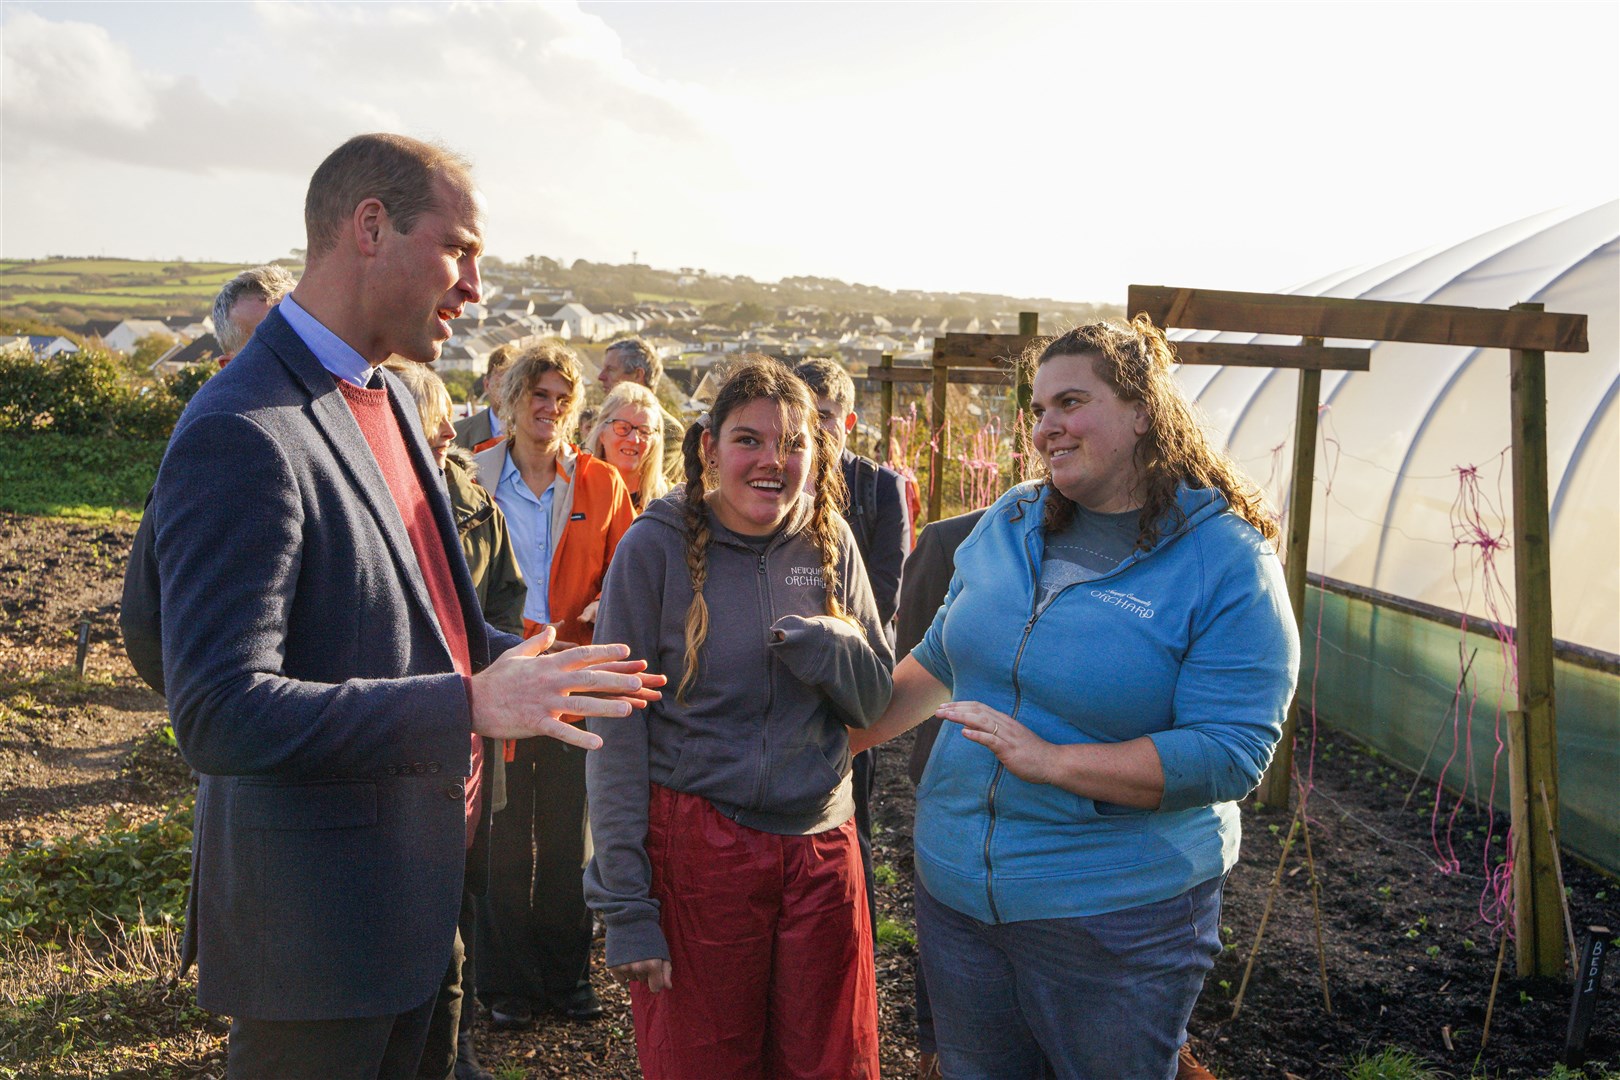 The Duke of Cornwall during his first official visit to Cornwall since taking on his new role, visits Newquay Orchard, a seven-acre urban greenspace (Hugh Hastings/PA)